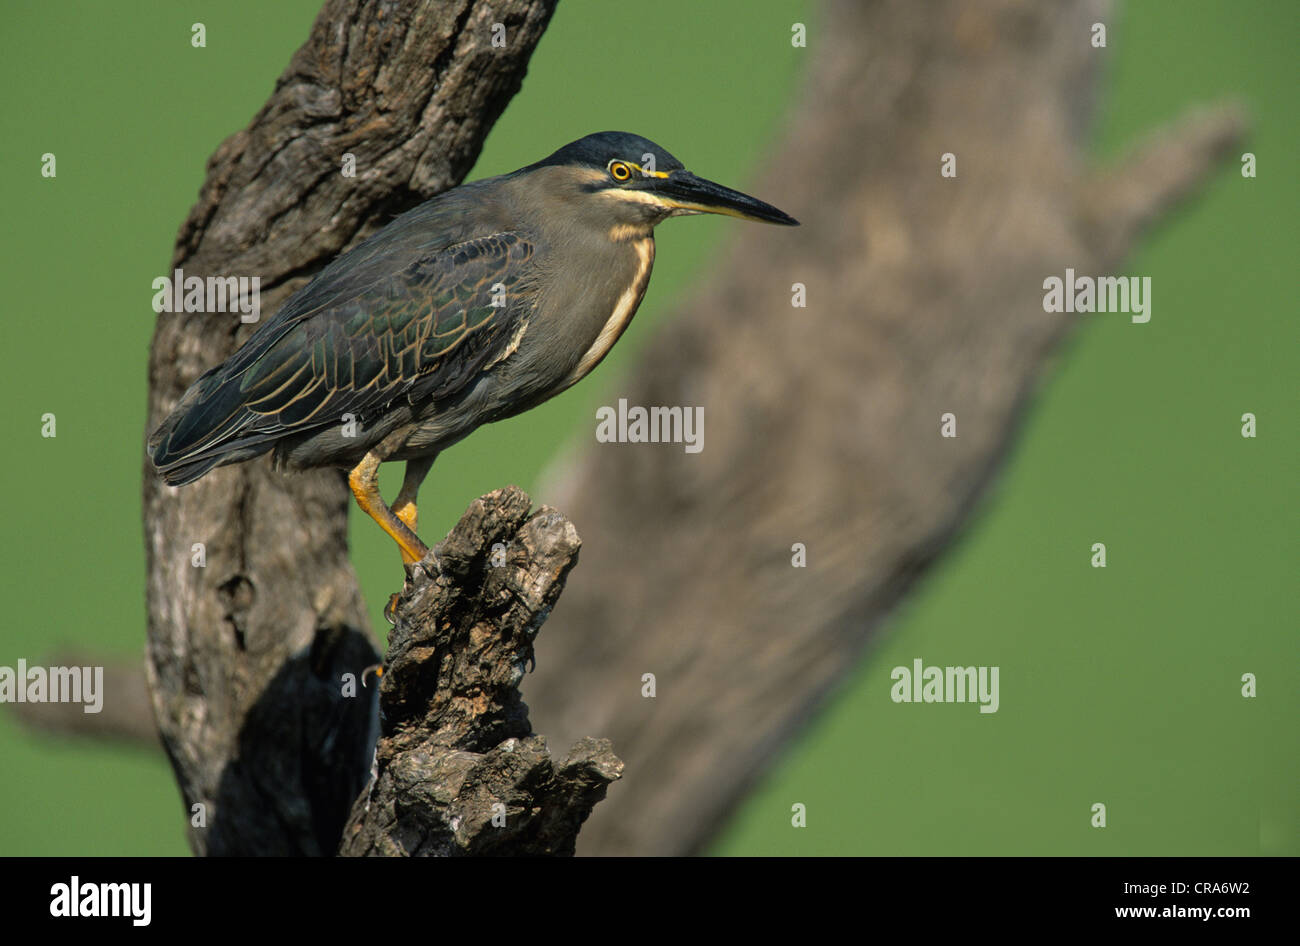 Striated Heron or Greenbacked Heron (Butorides striatus), Kruger National Park, South Africa, Africa Stock Photo